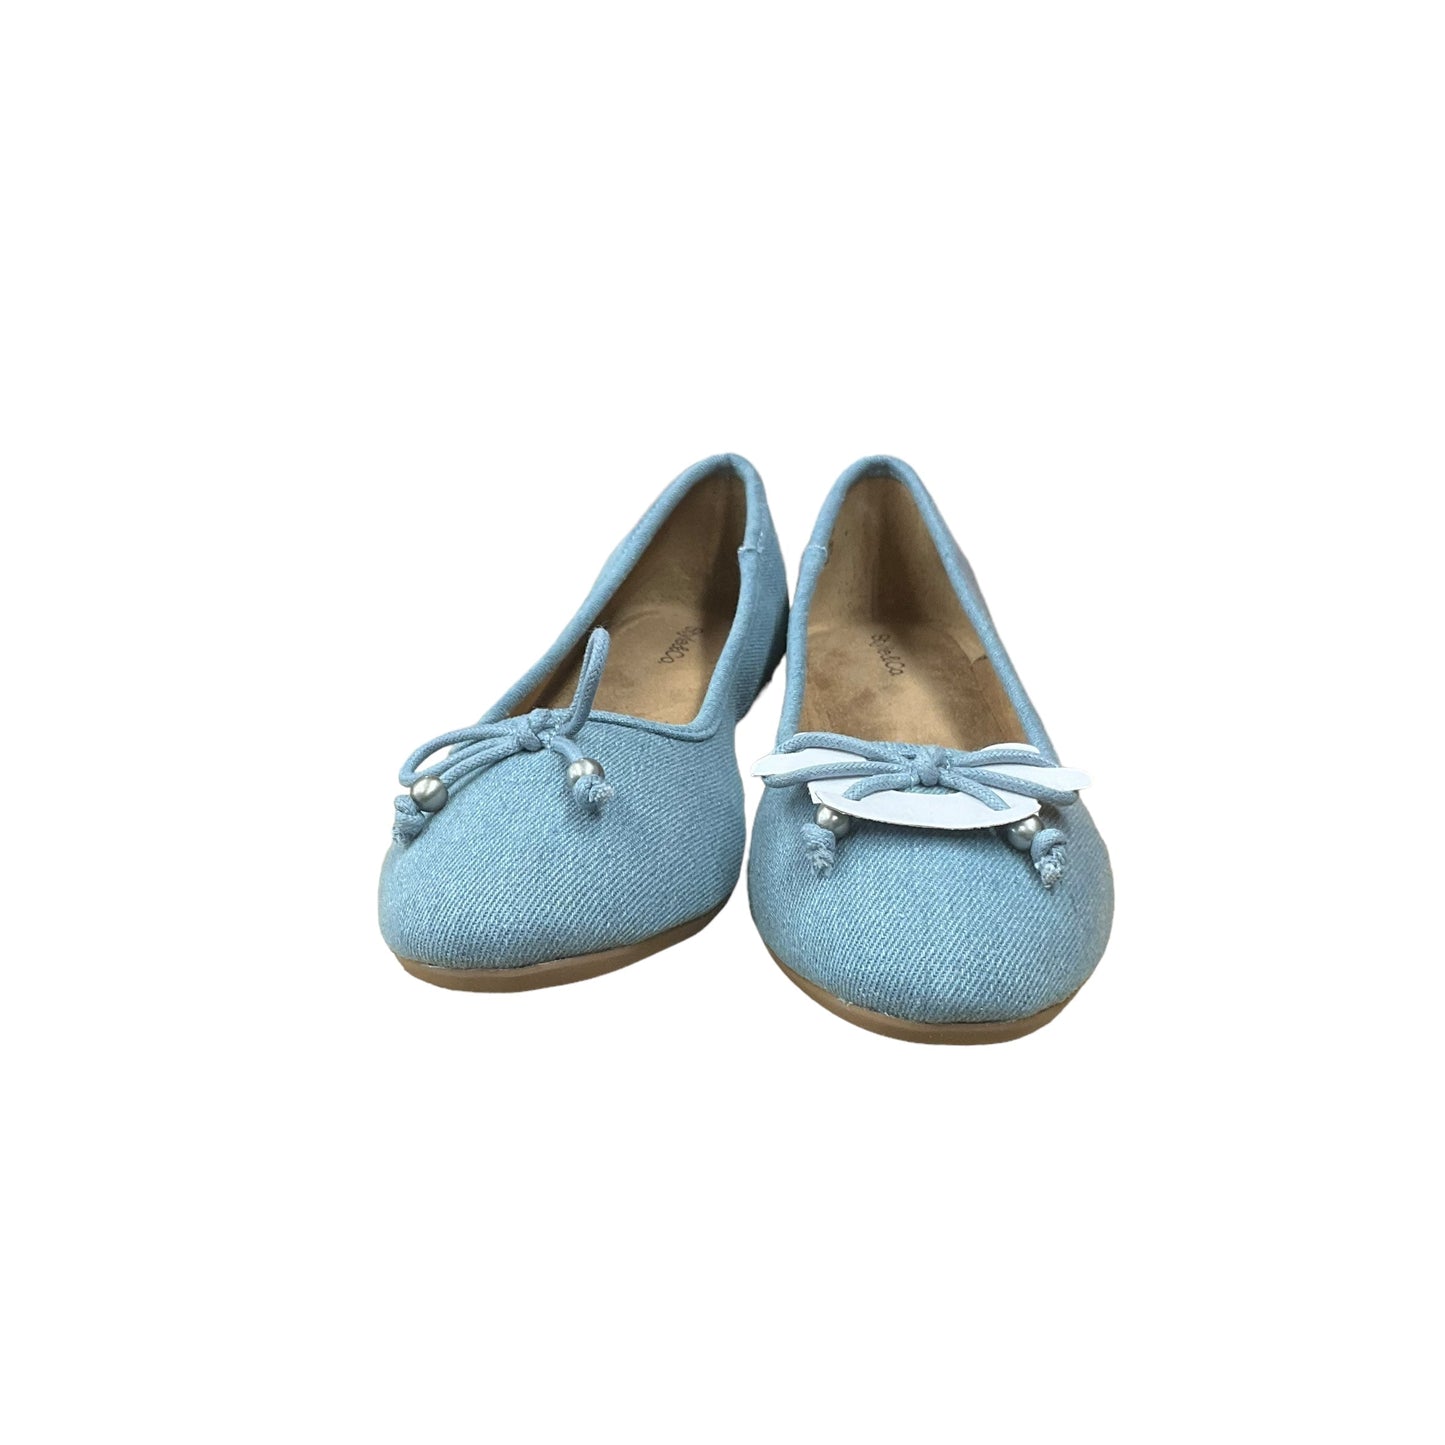 Blue Denim Shoes Flats Style And Company, Size 9